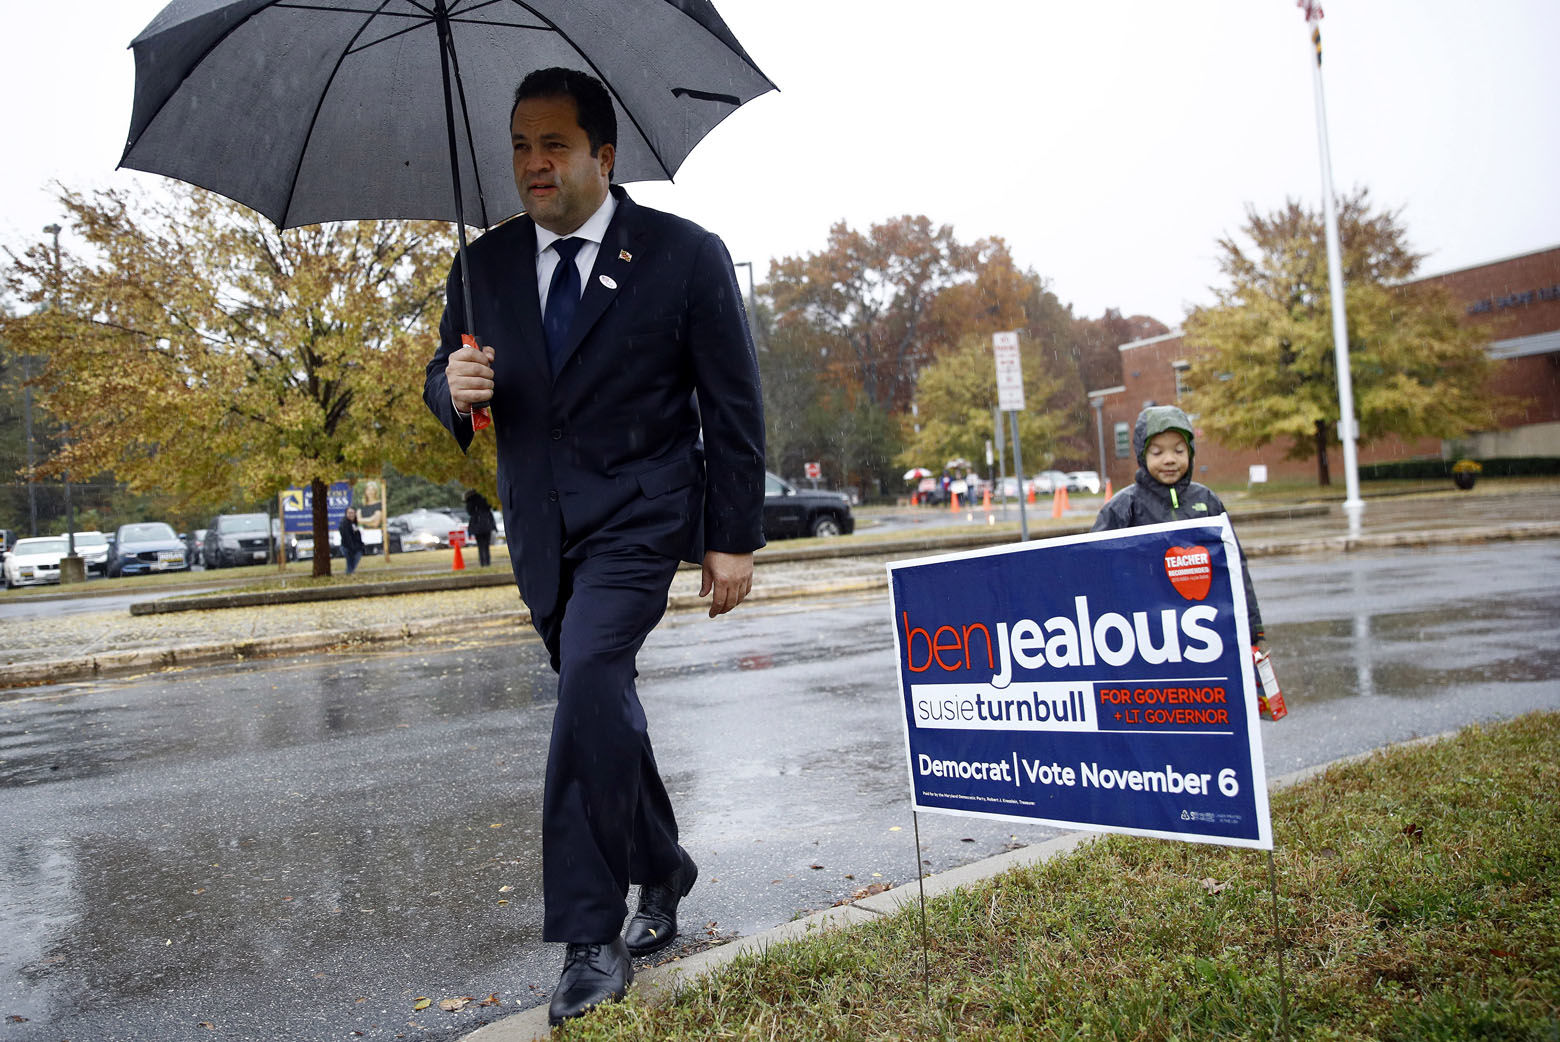 Maryland Democratic gubernatorial candidate Ben Jealous leaves a polling place after voting, Tuesday, Nov. 6, 2018, at Lake Shore Elementary School in Pasadena, Md. Jealous is running against incumbent Gov. Larry Hogan. (AP Photo/Patrick Semansky)